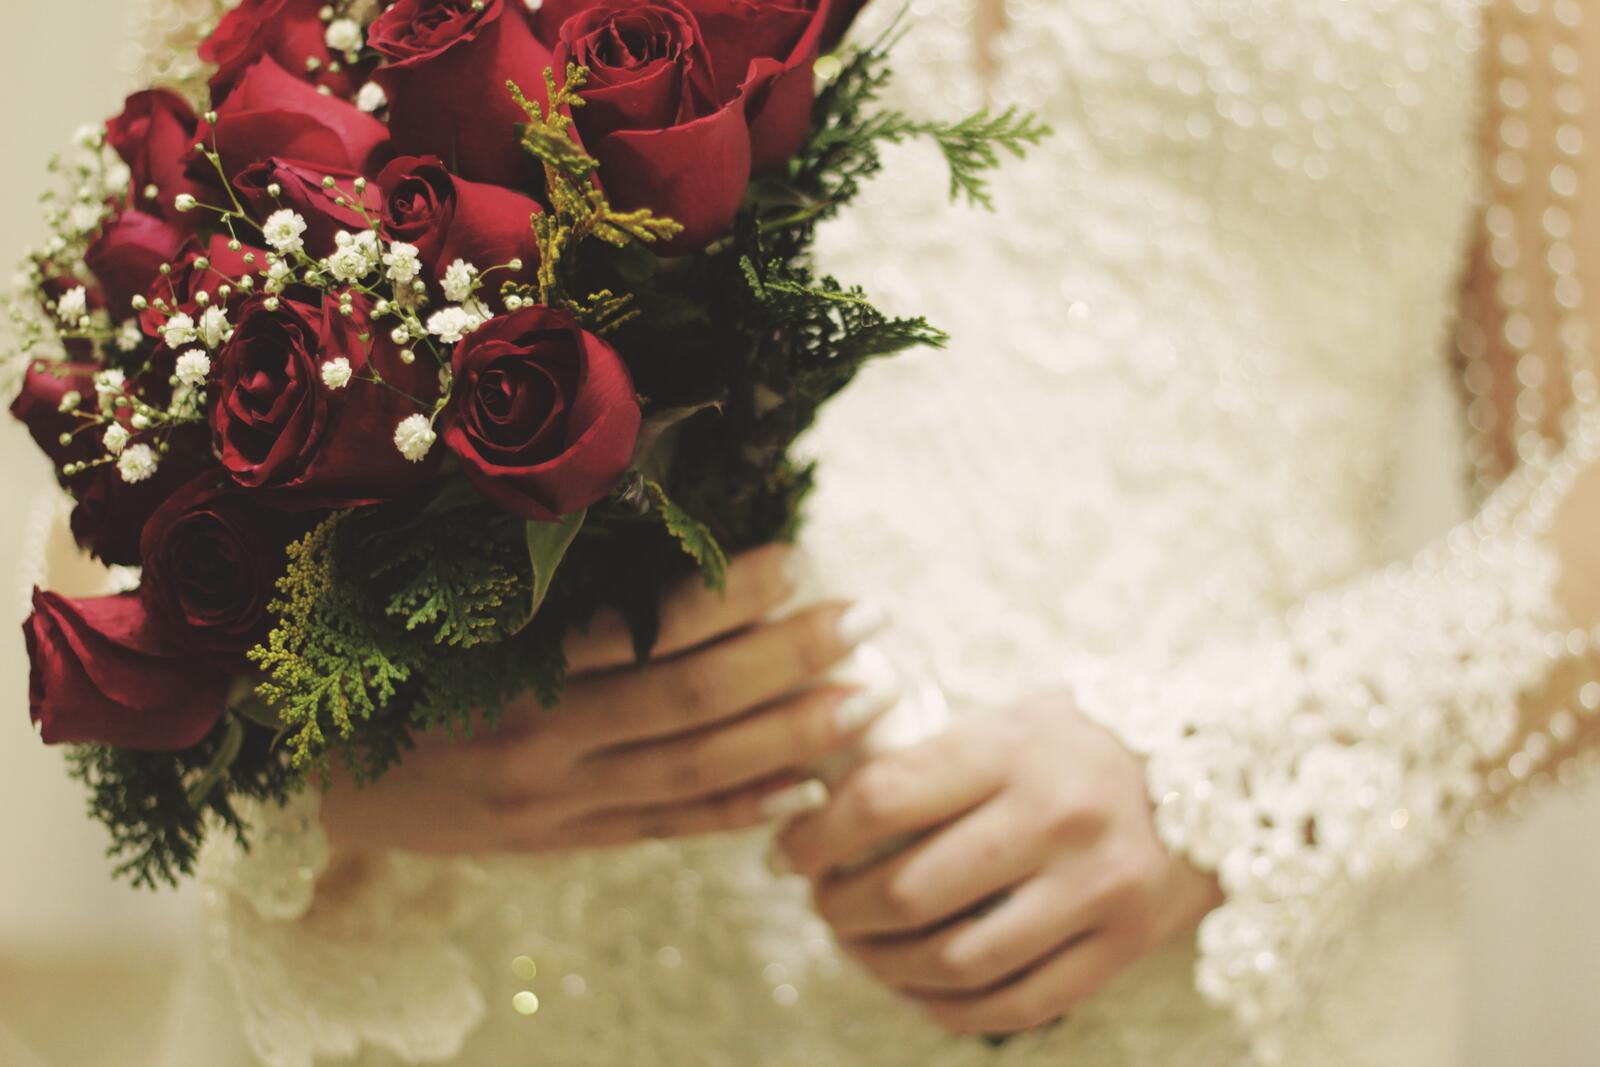 Free photo A bride with a bouquet of red roses